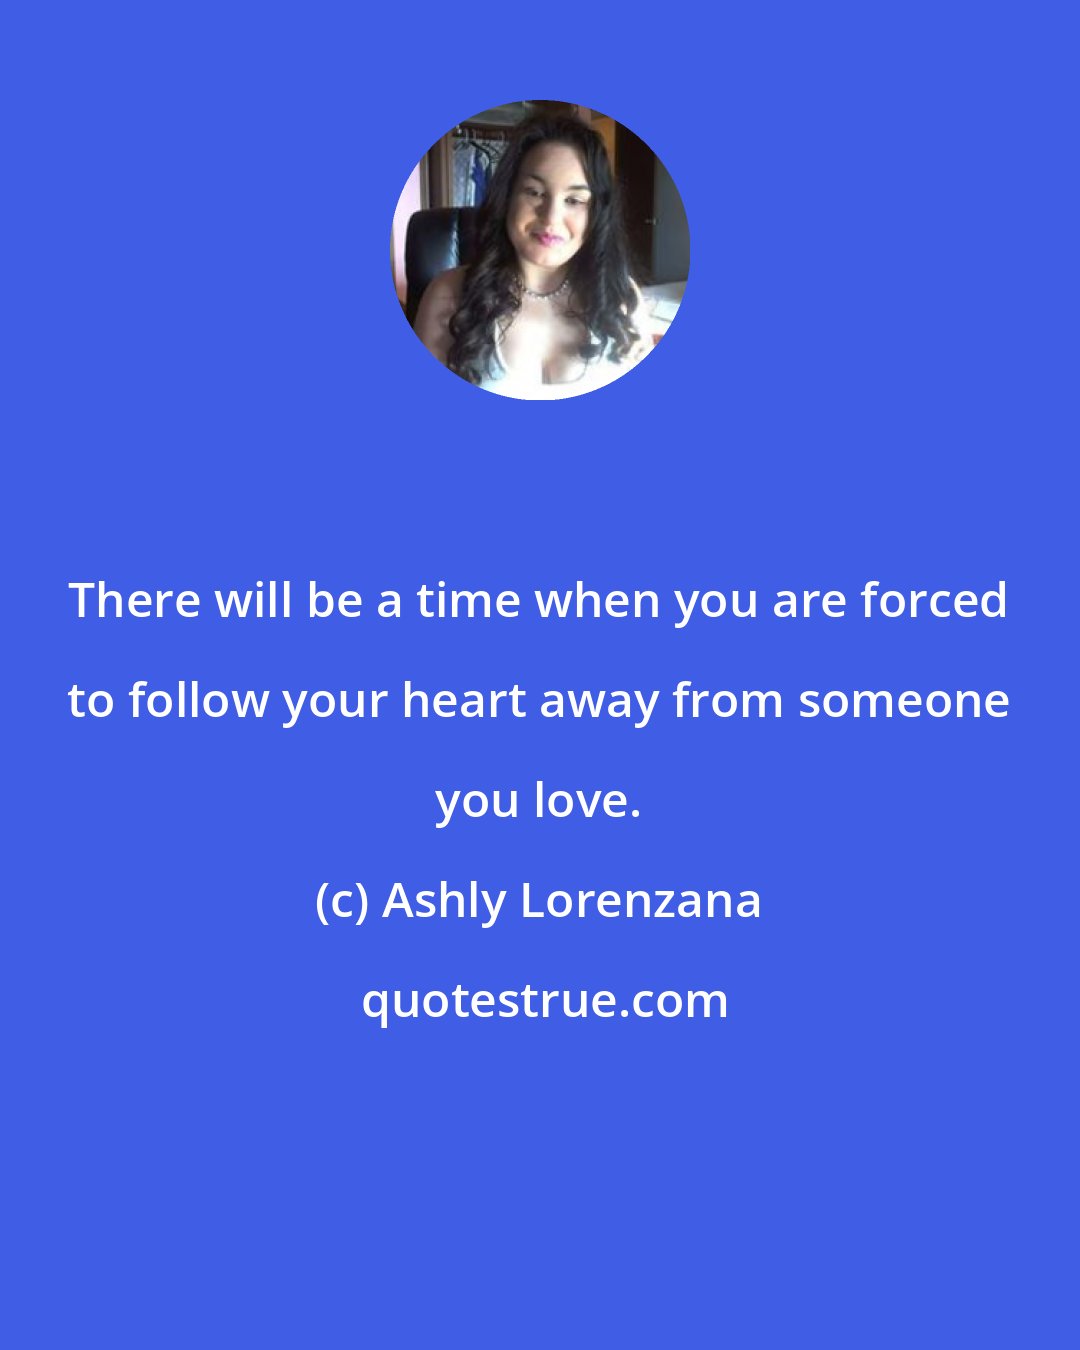 Ashly Lorenzana: There will be a time when you are forced to follow your heart away from someone you love.